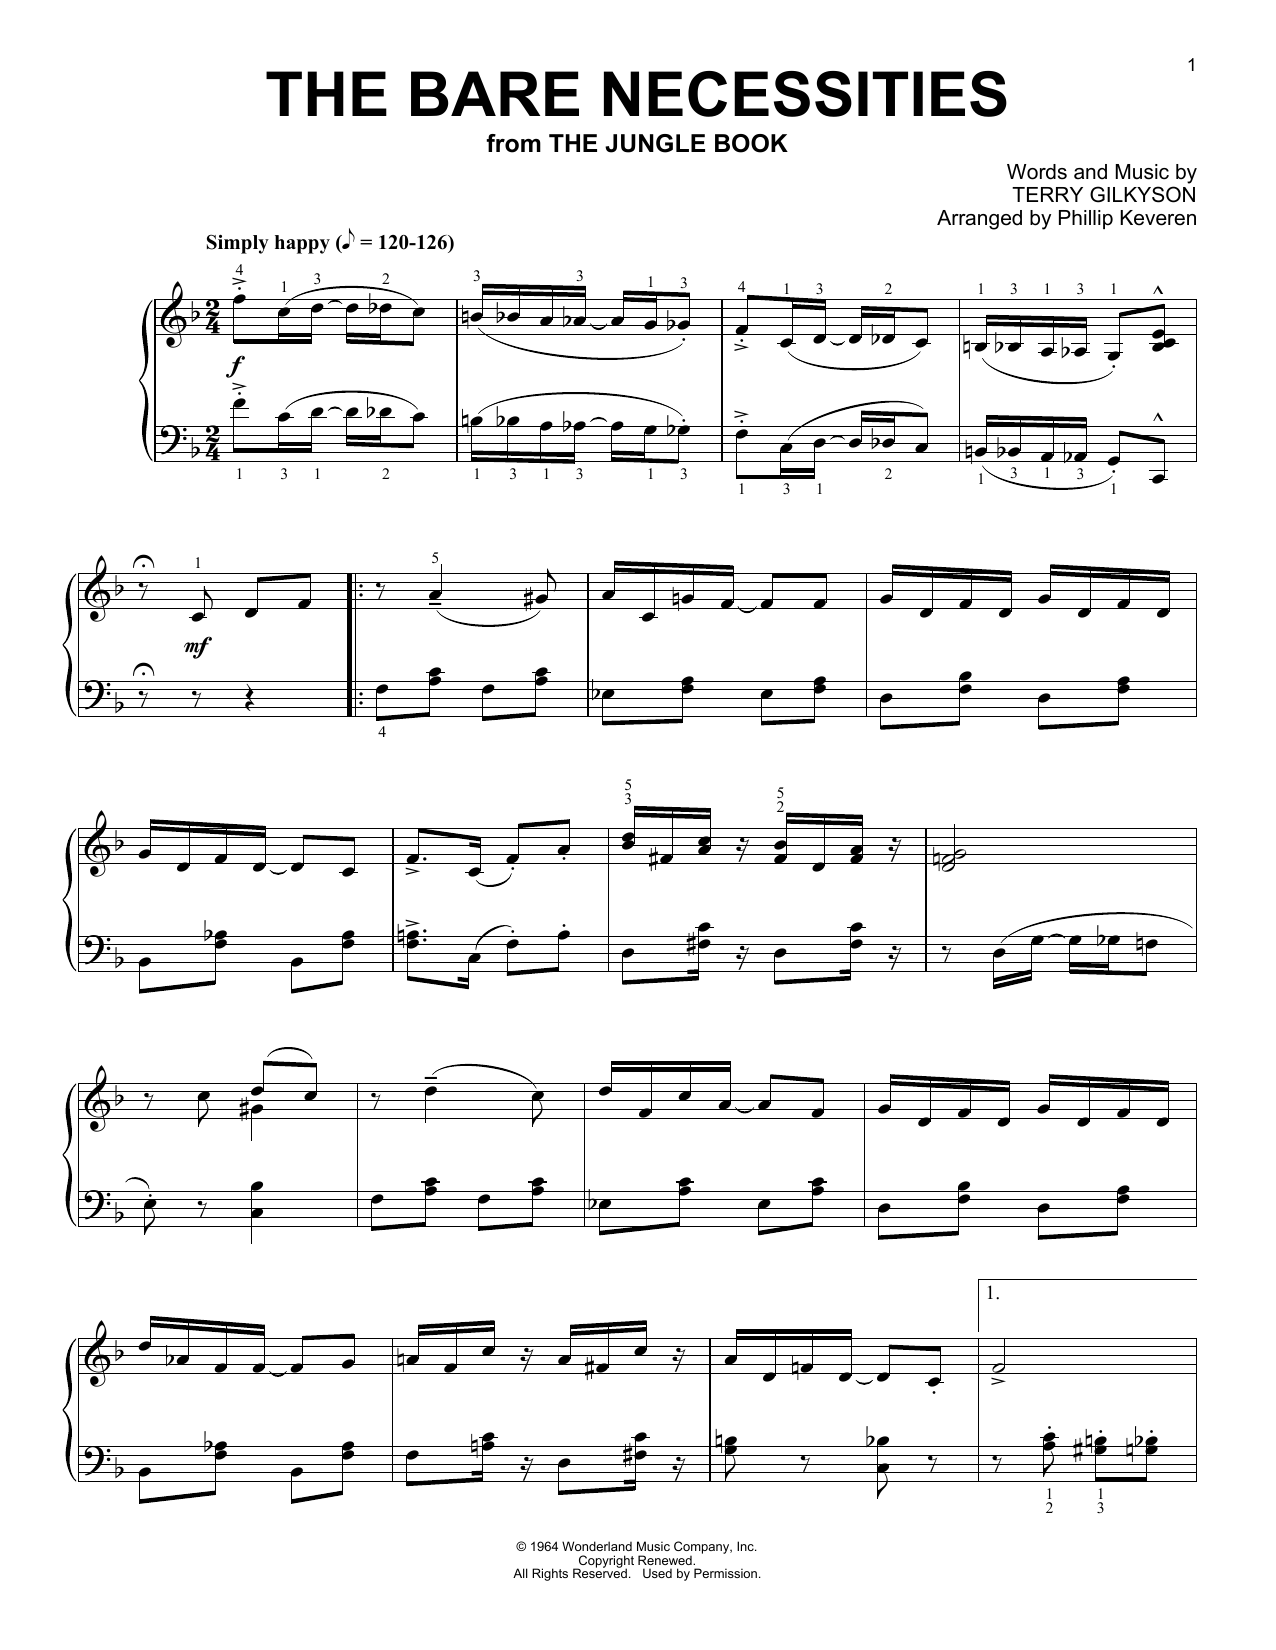 Download Terry Gilkyson The Bare Necessities [Ragtime version] Sheet Music